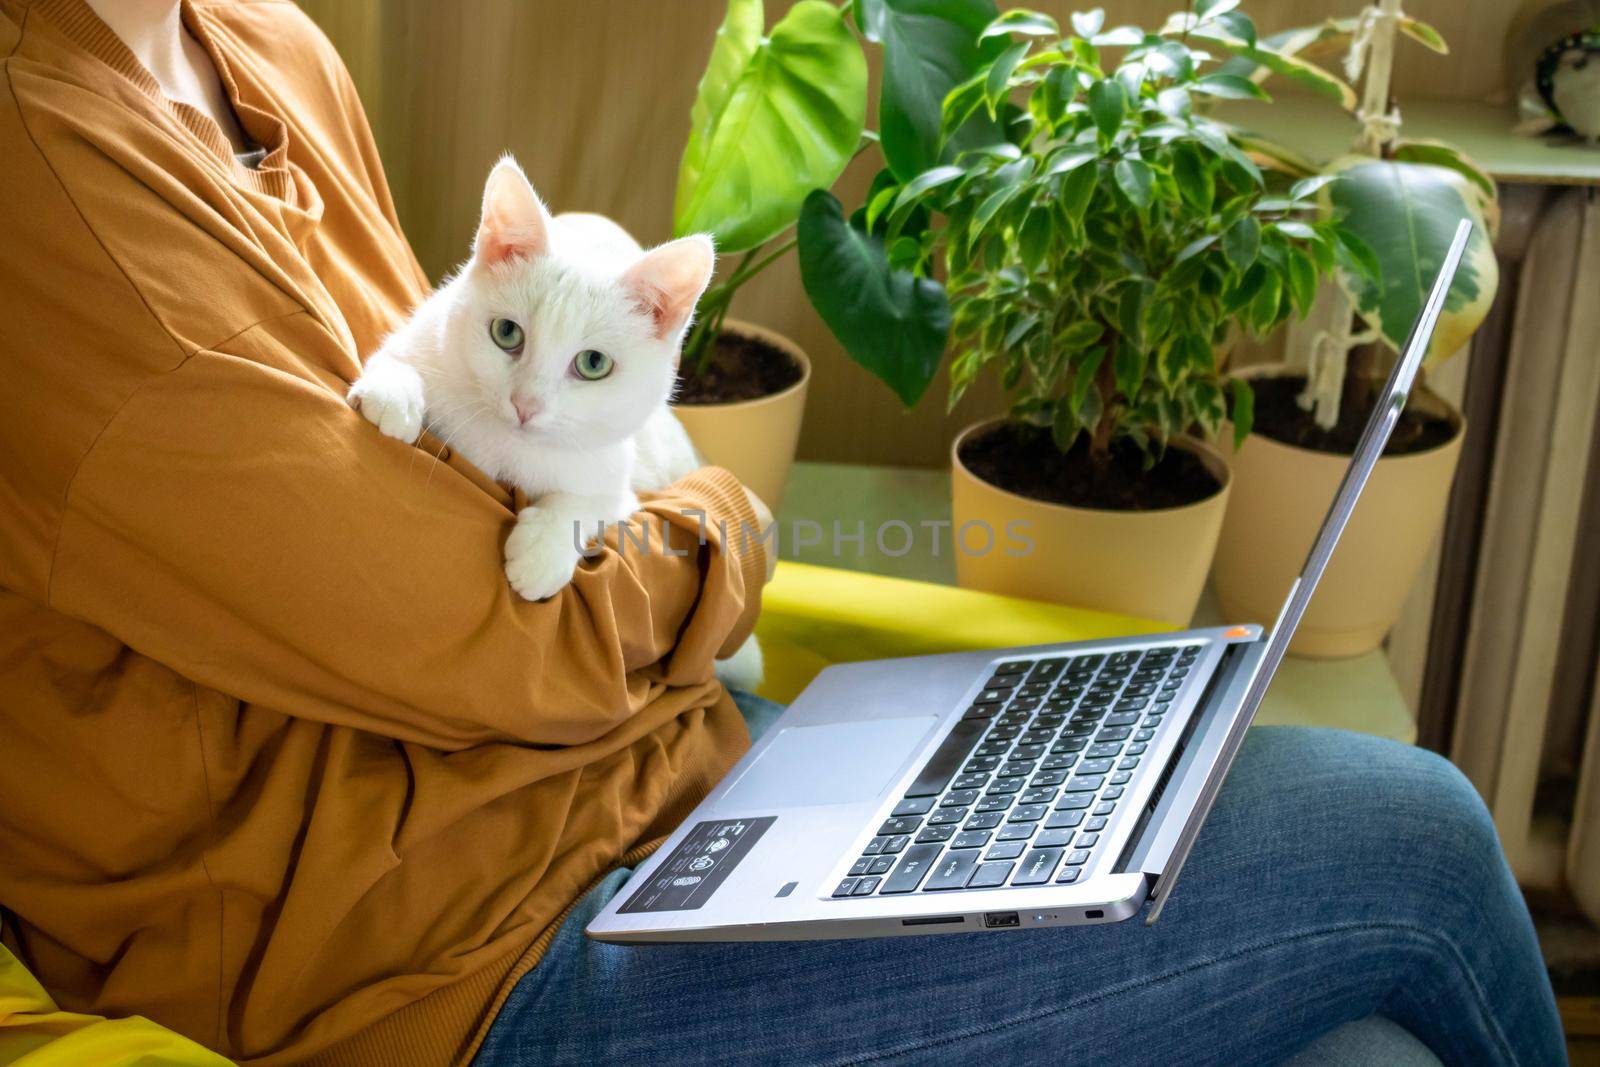 The white cat is calmly sleeping in the arms of the hostess,in front of the laptop.The concept of working at home by lapushka62